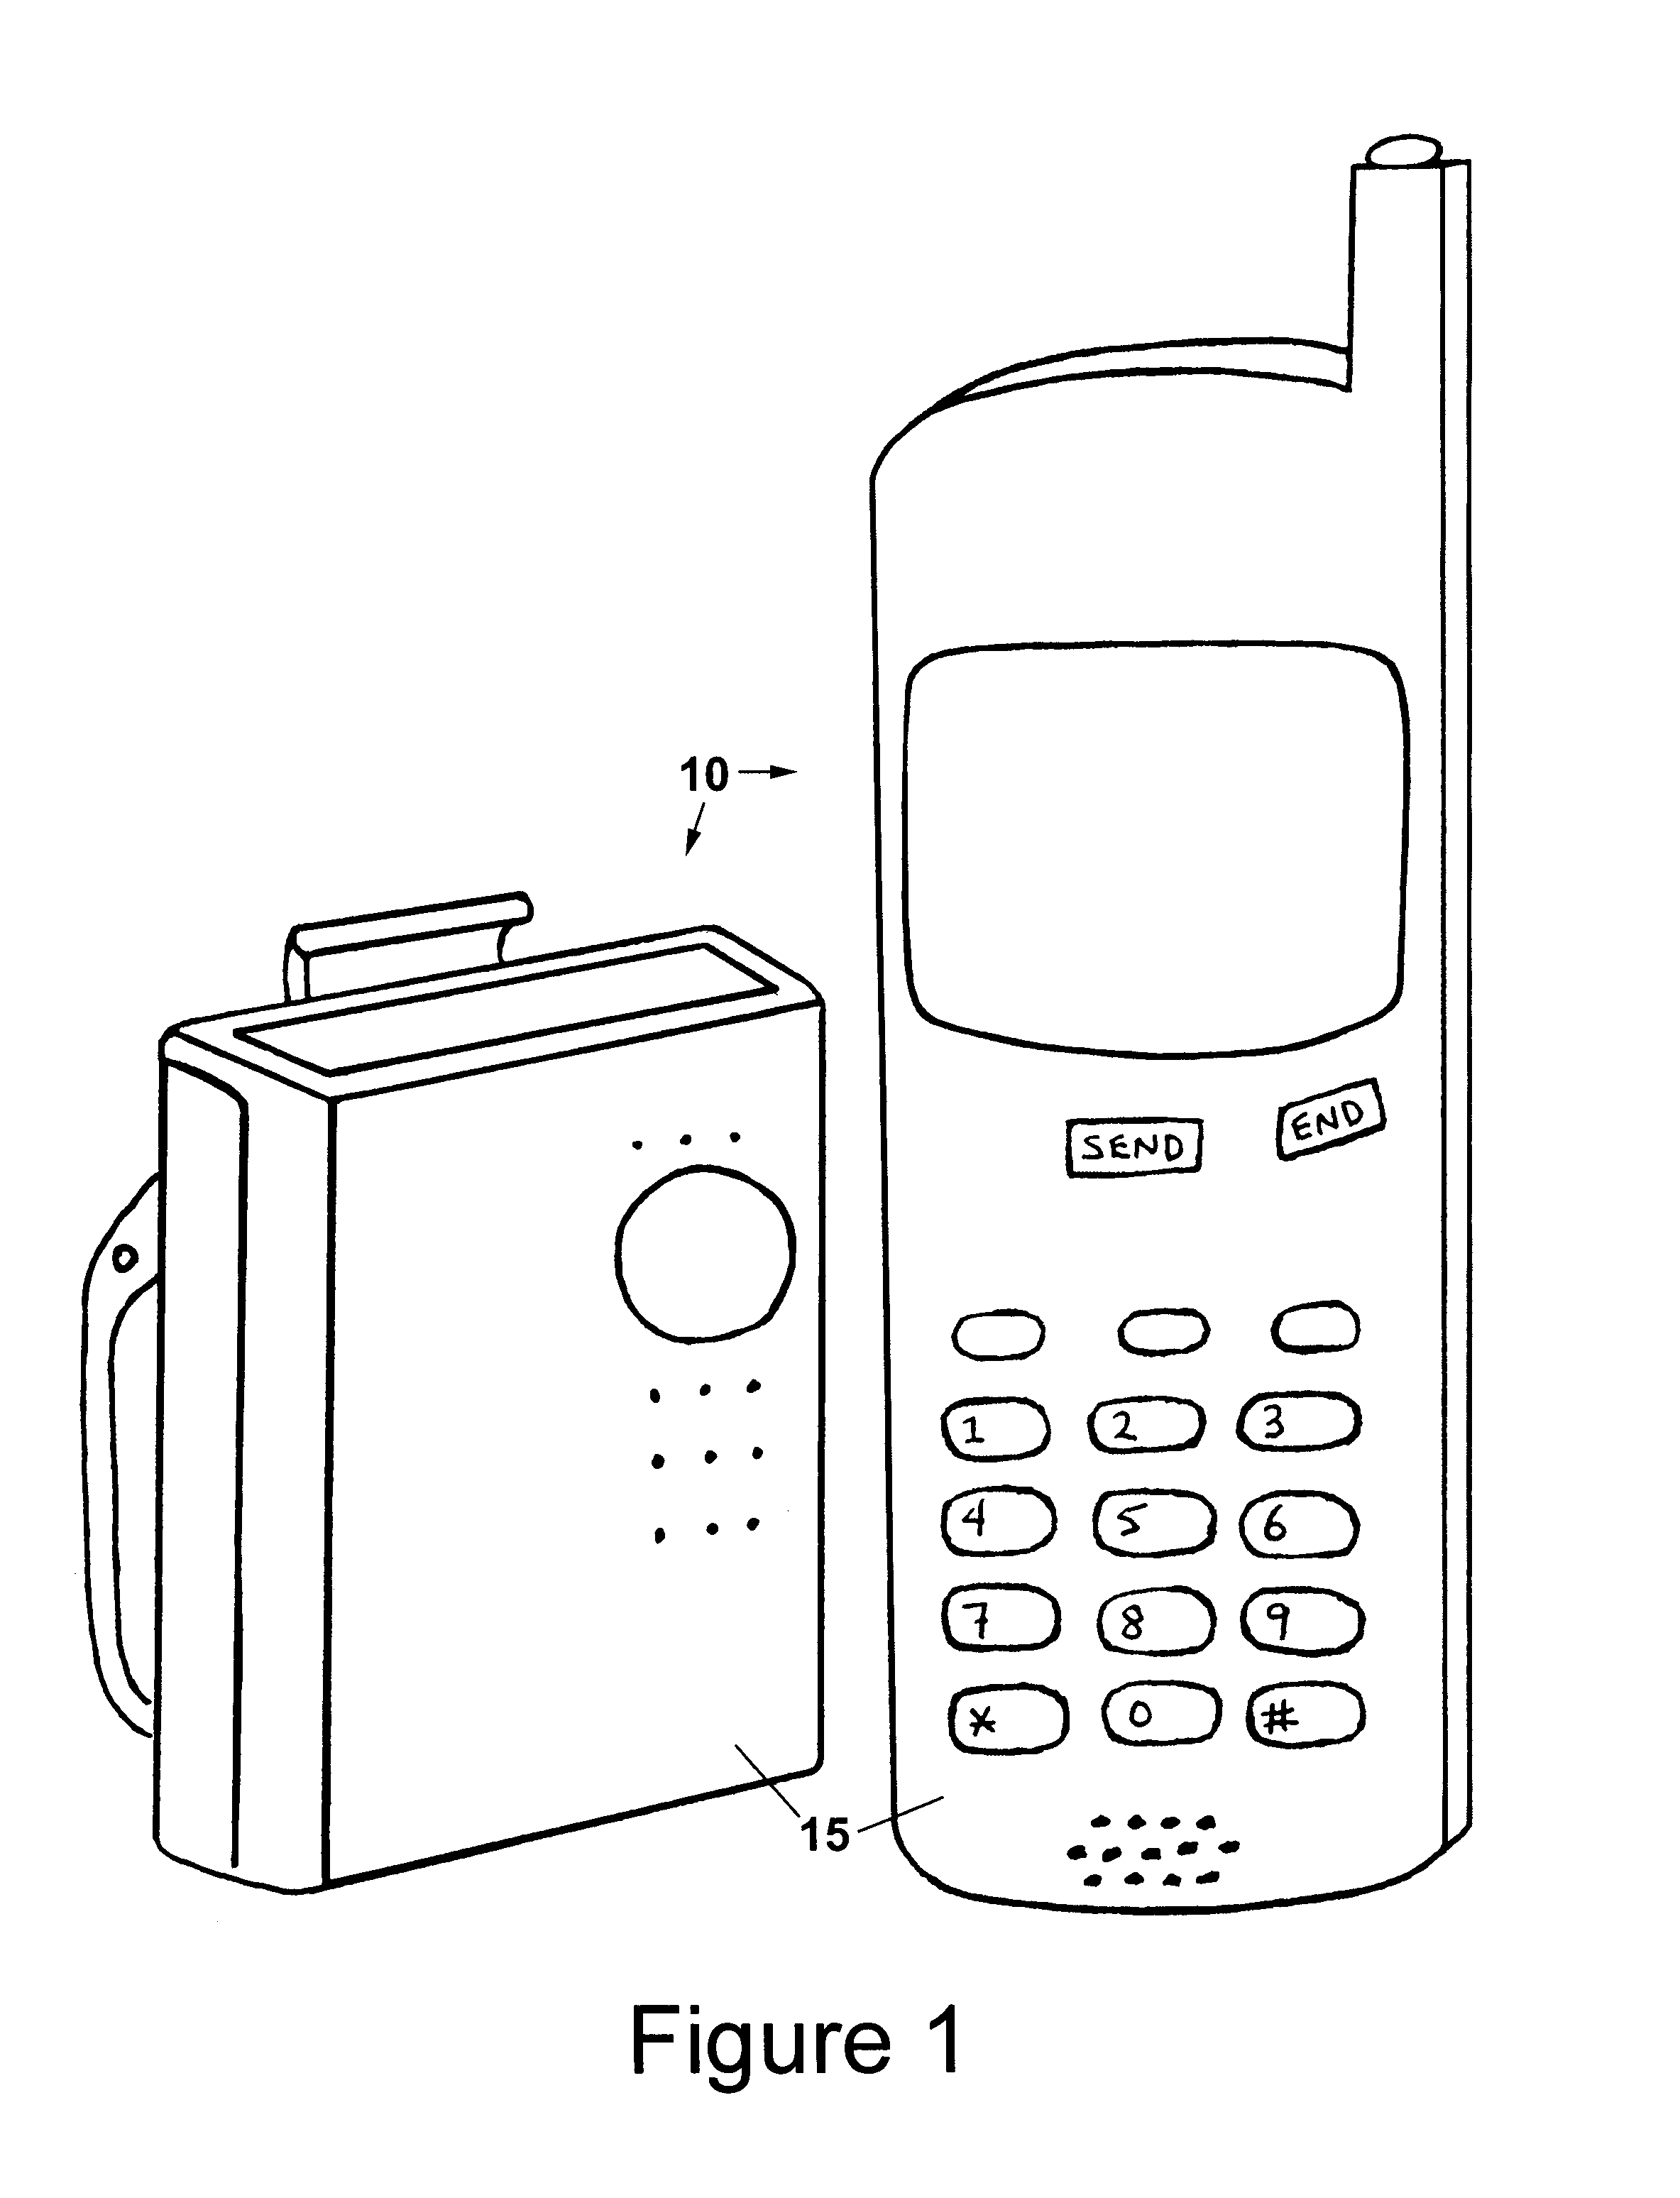 Germ-resistant communication and data transfer/entry products